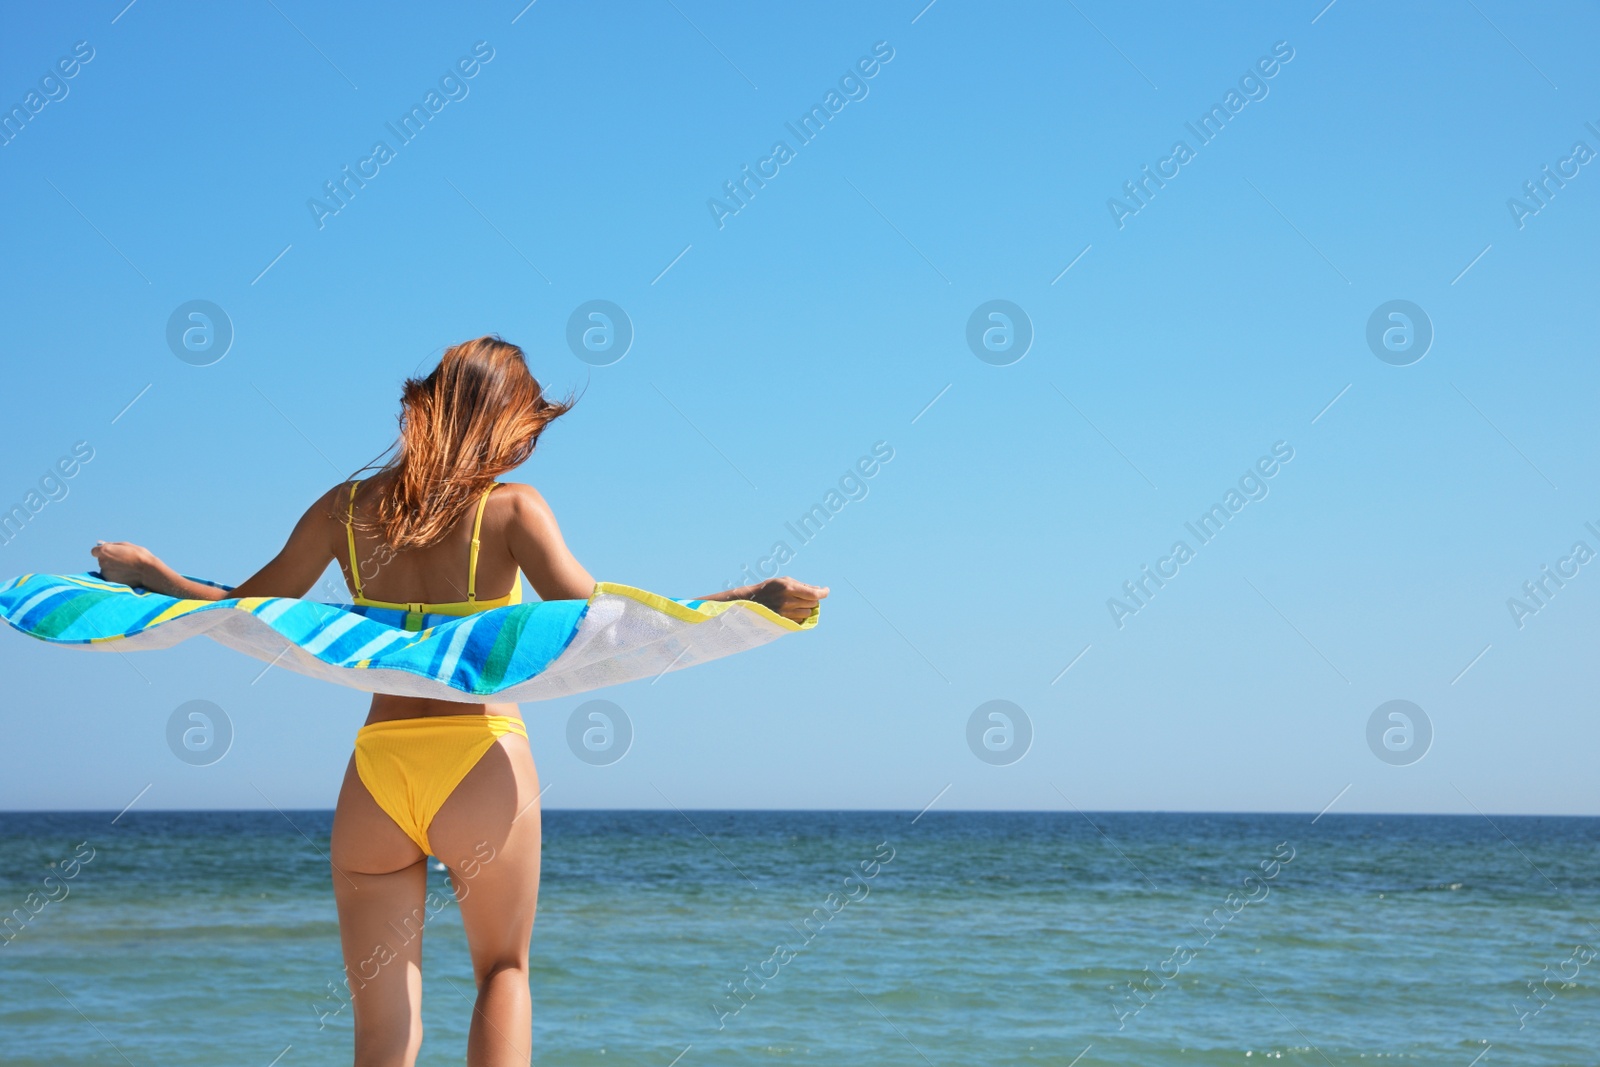 Photo of Woman with beach towel near sea on sunny day, back view